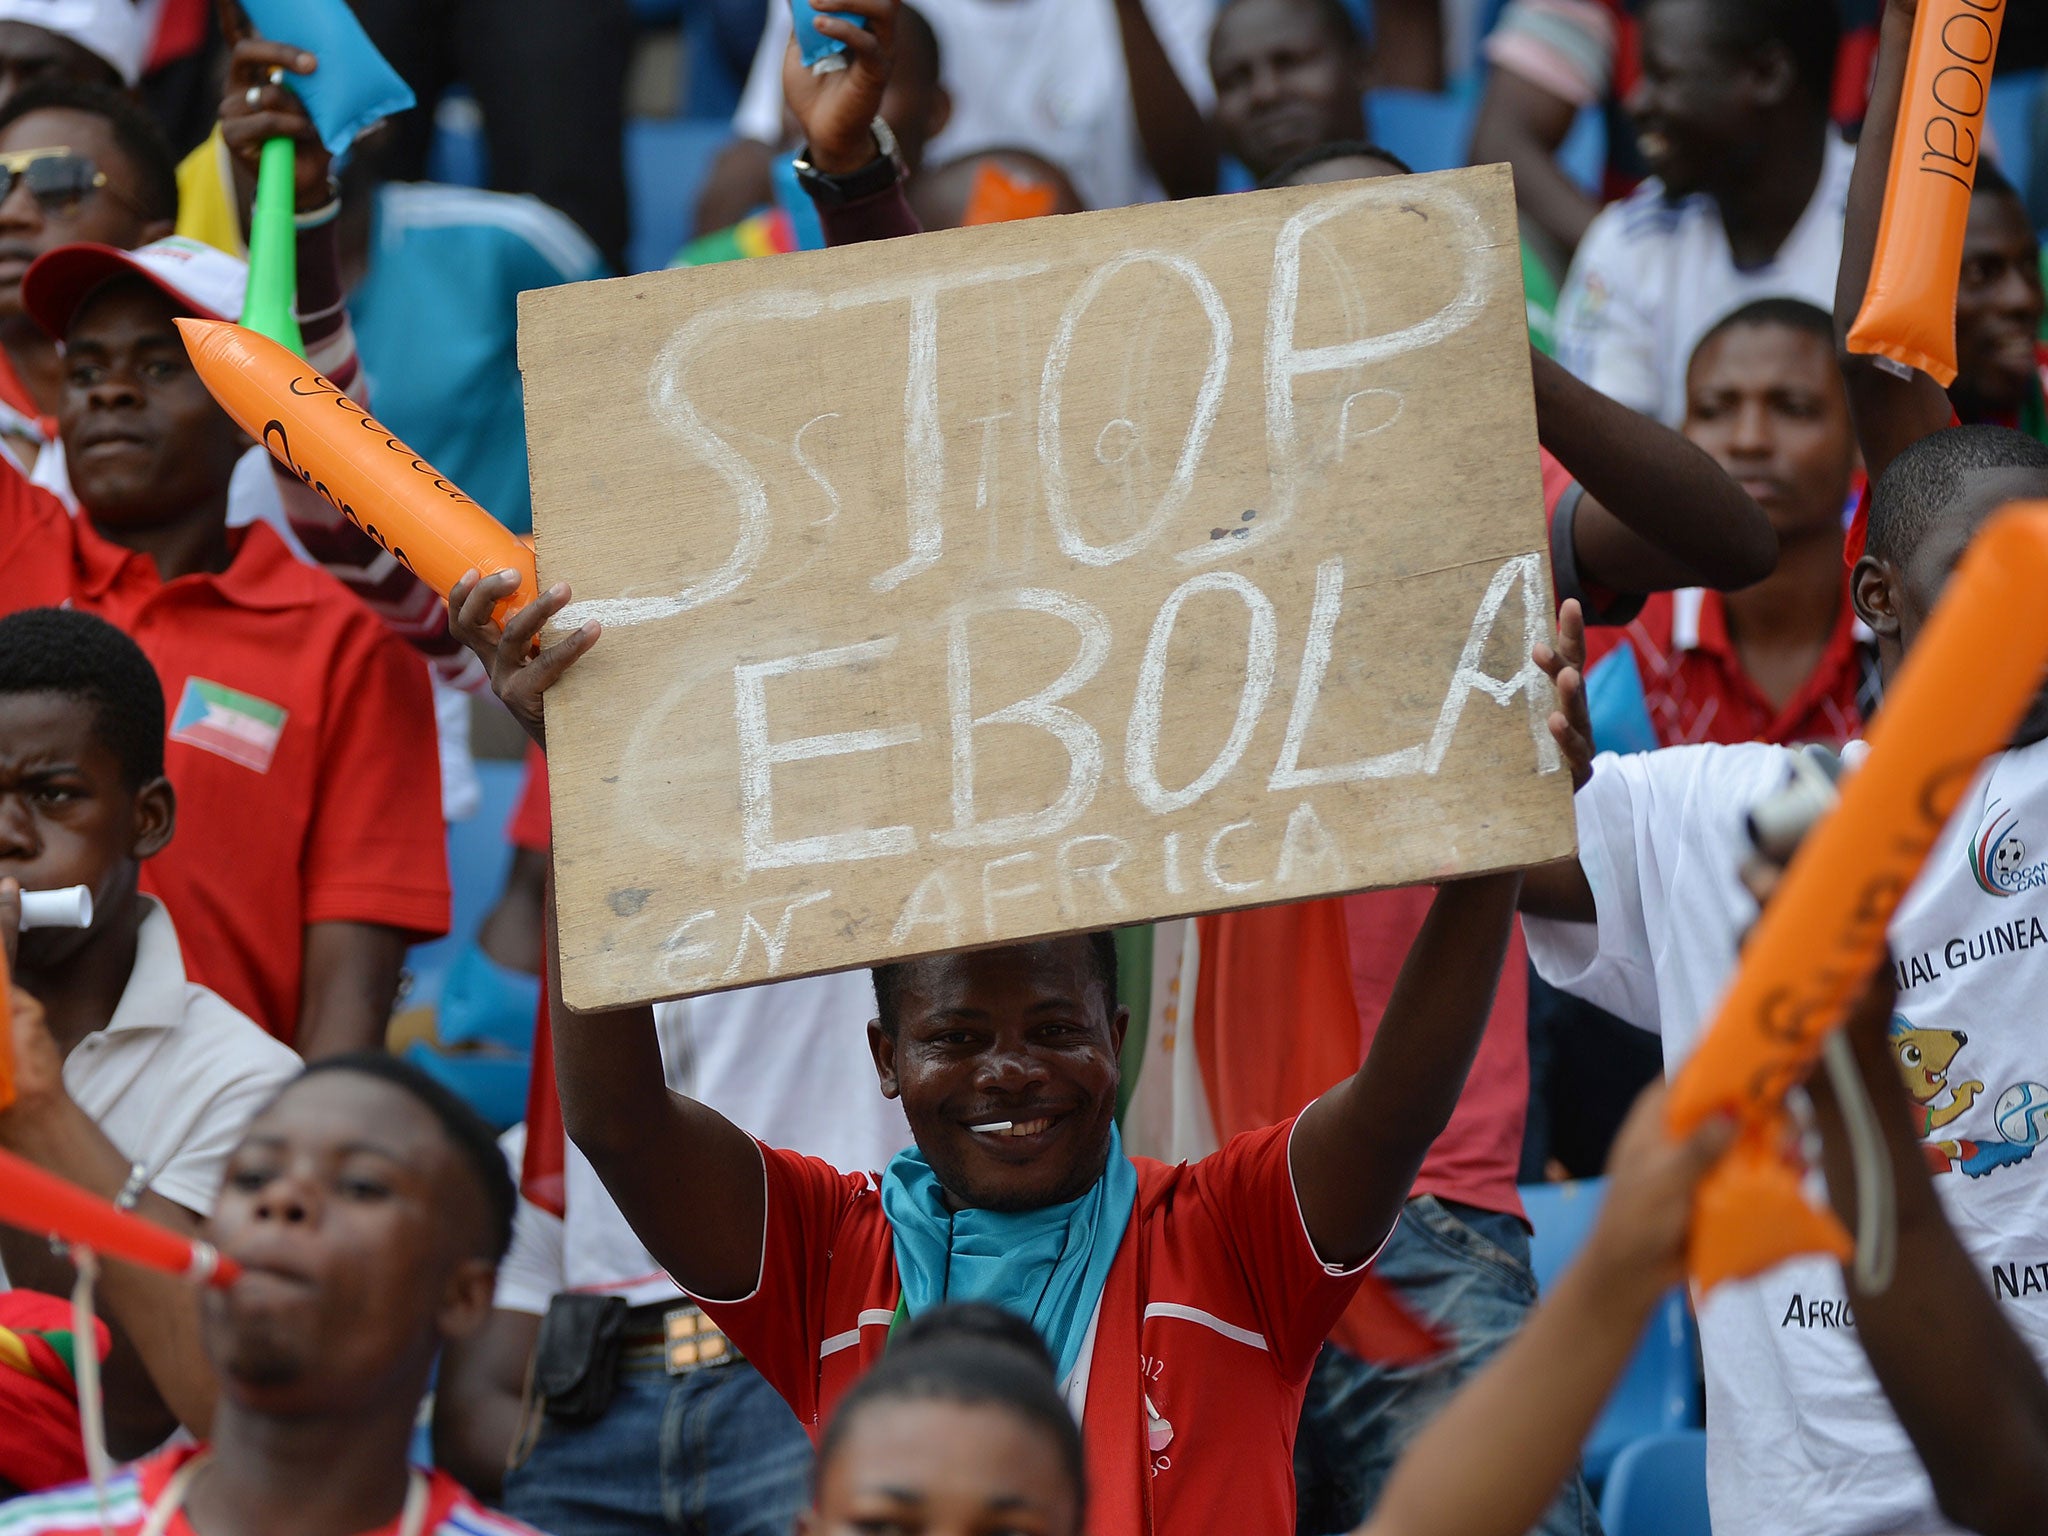 A fan holds a sign calling for an end to Ebola at the ongoing African Cup of Nations in Equatorial Guinea Getty